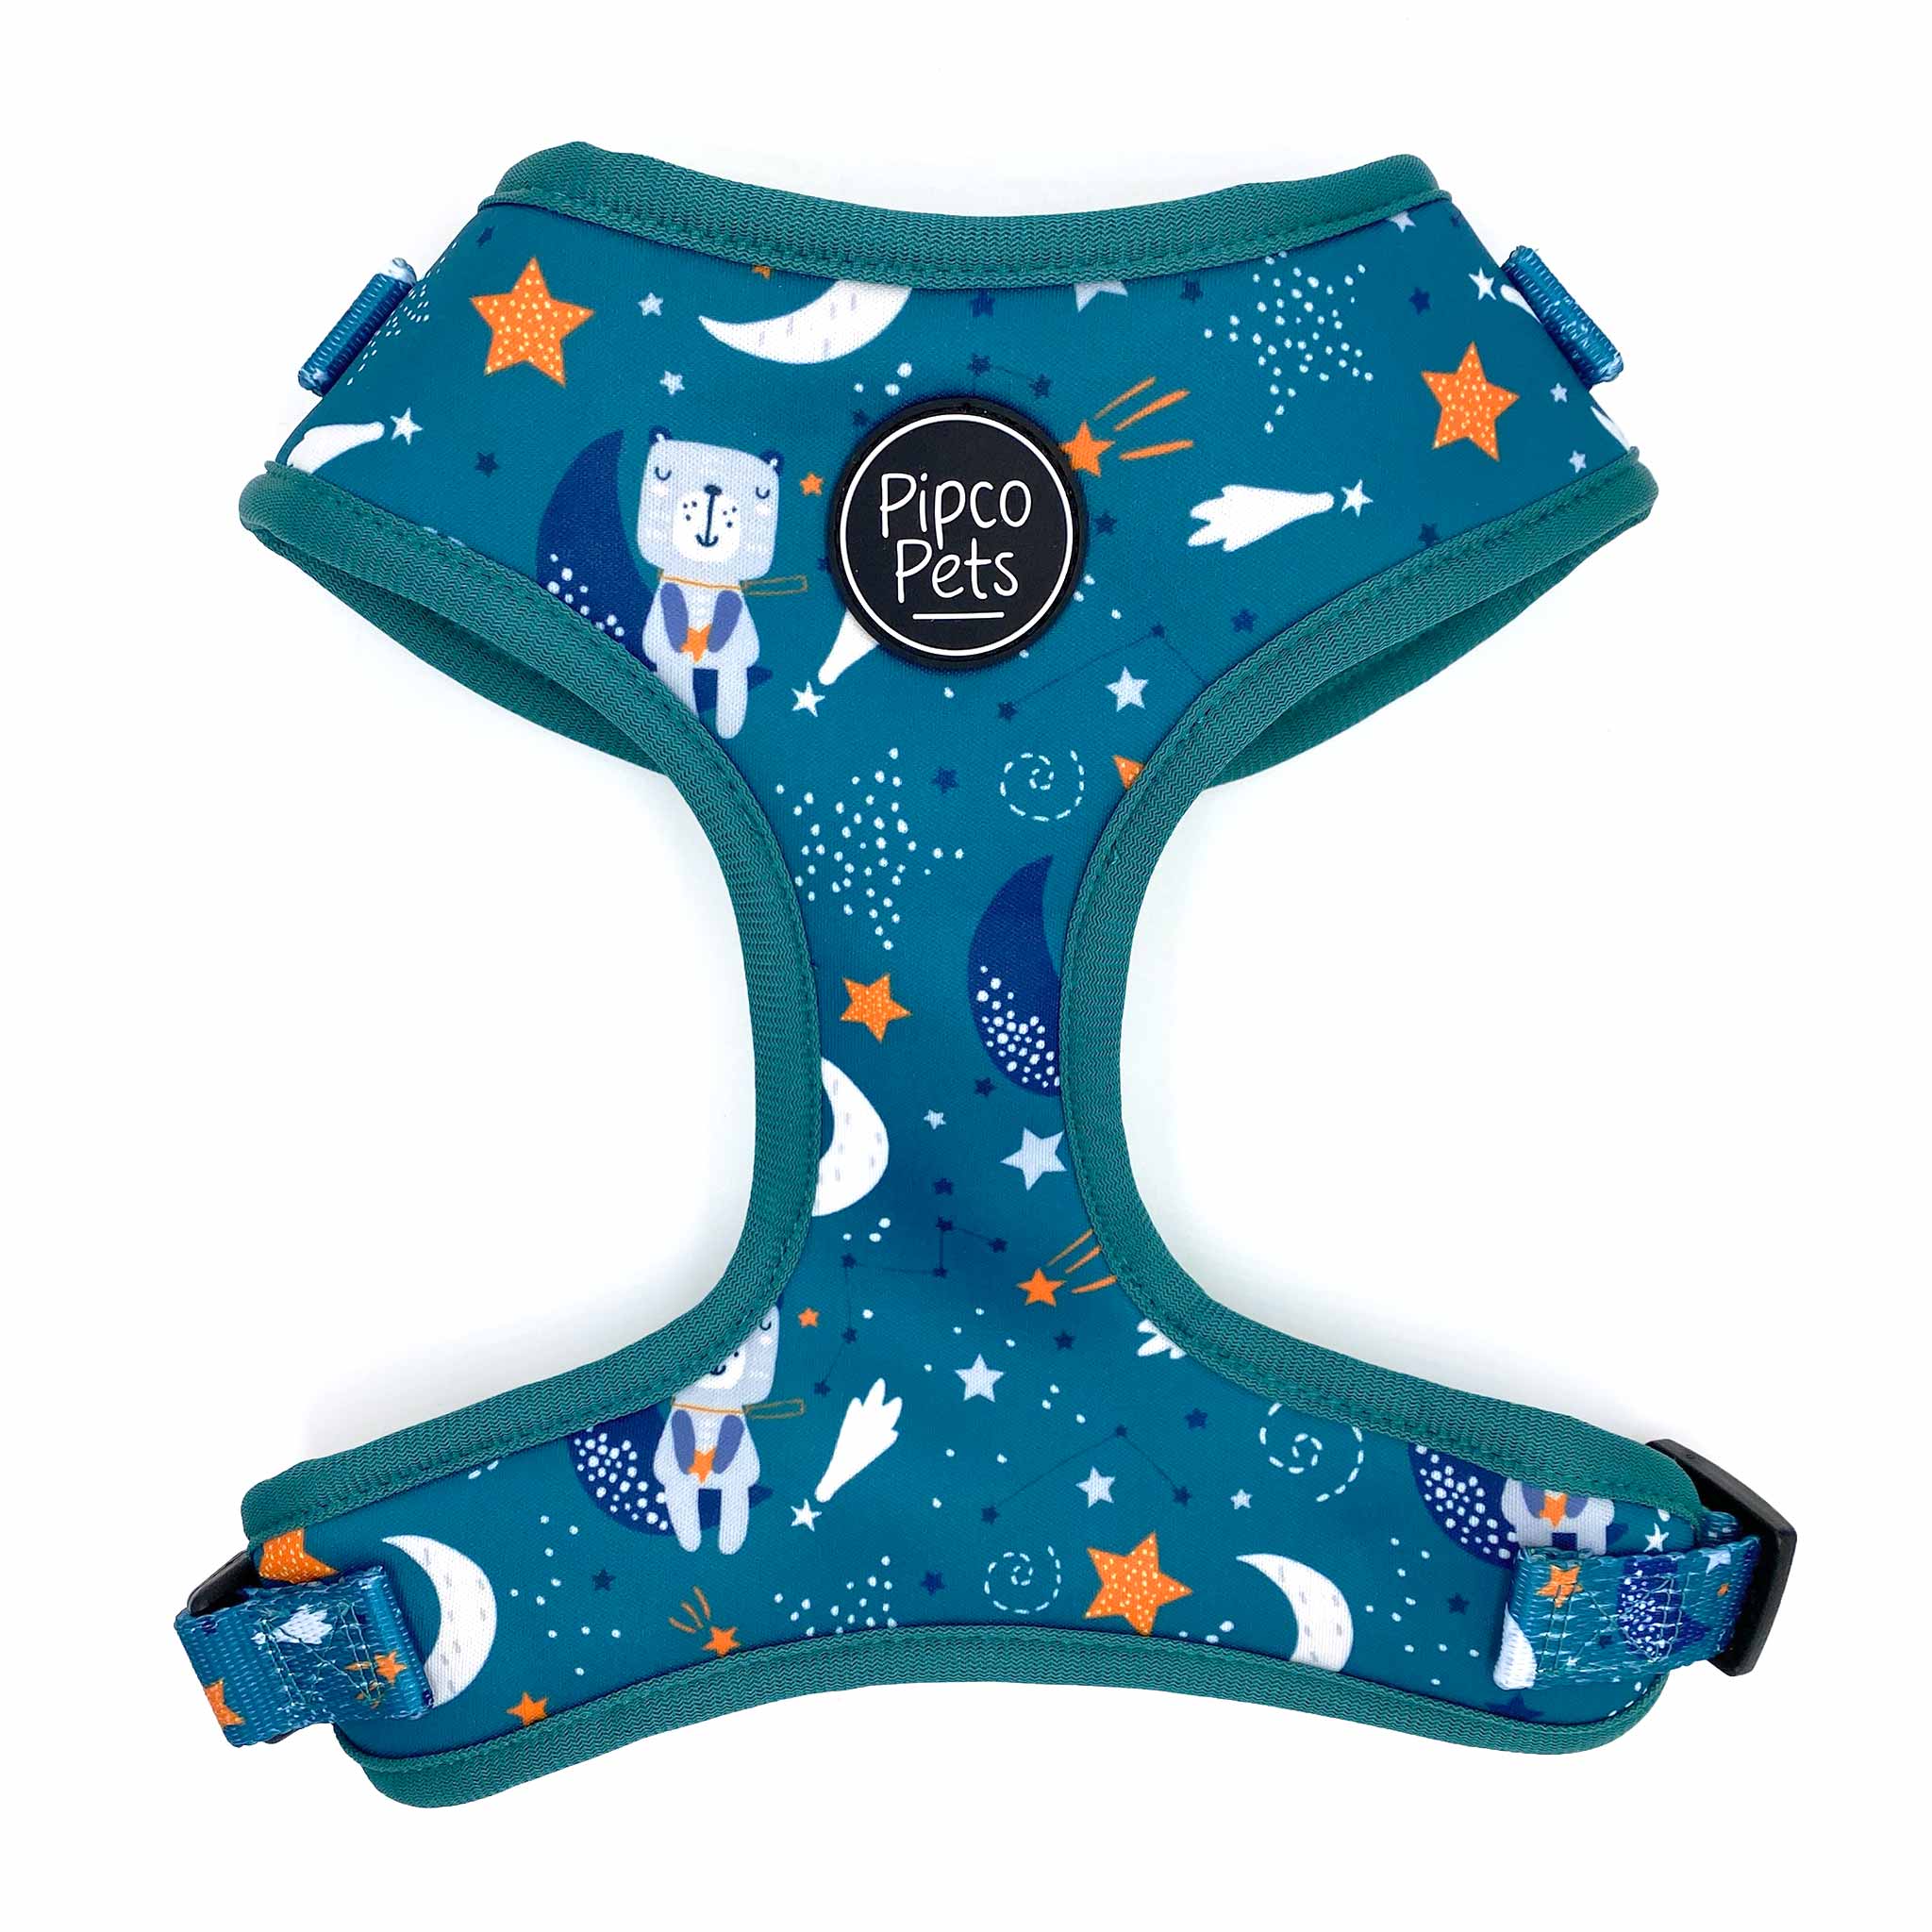 Front view of Pipco Pets adjustable dog harness with Starry Night outer space and stars print pattern in teal